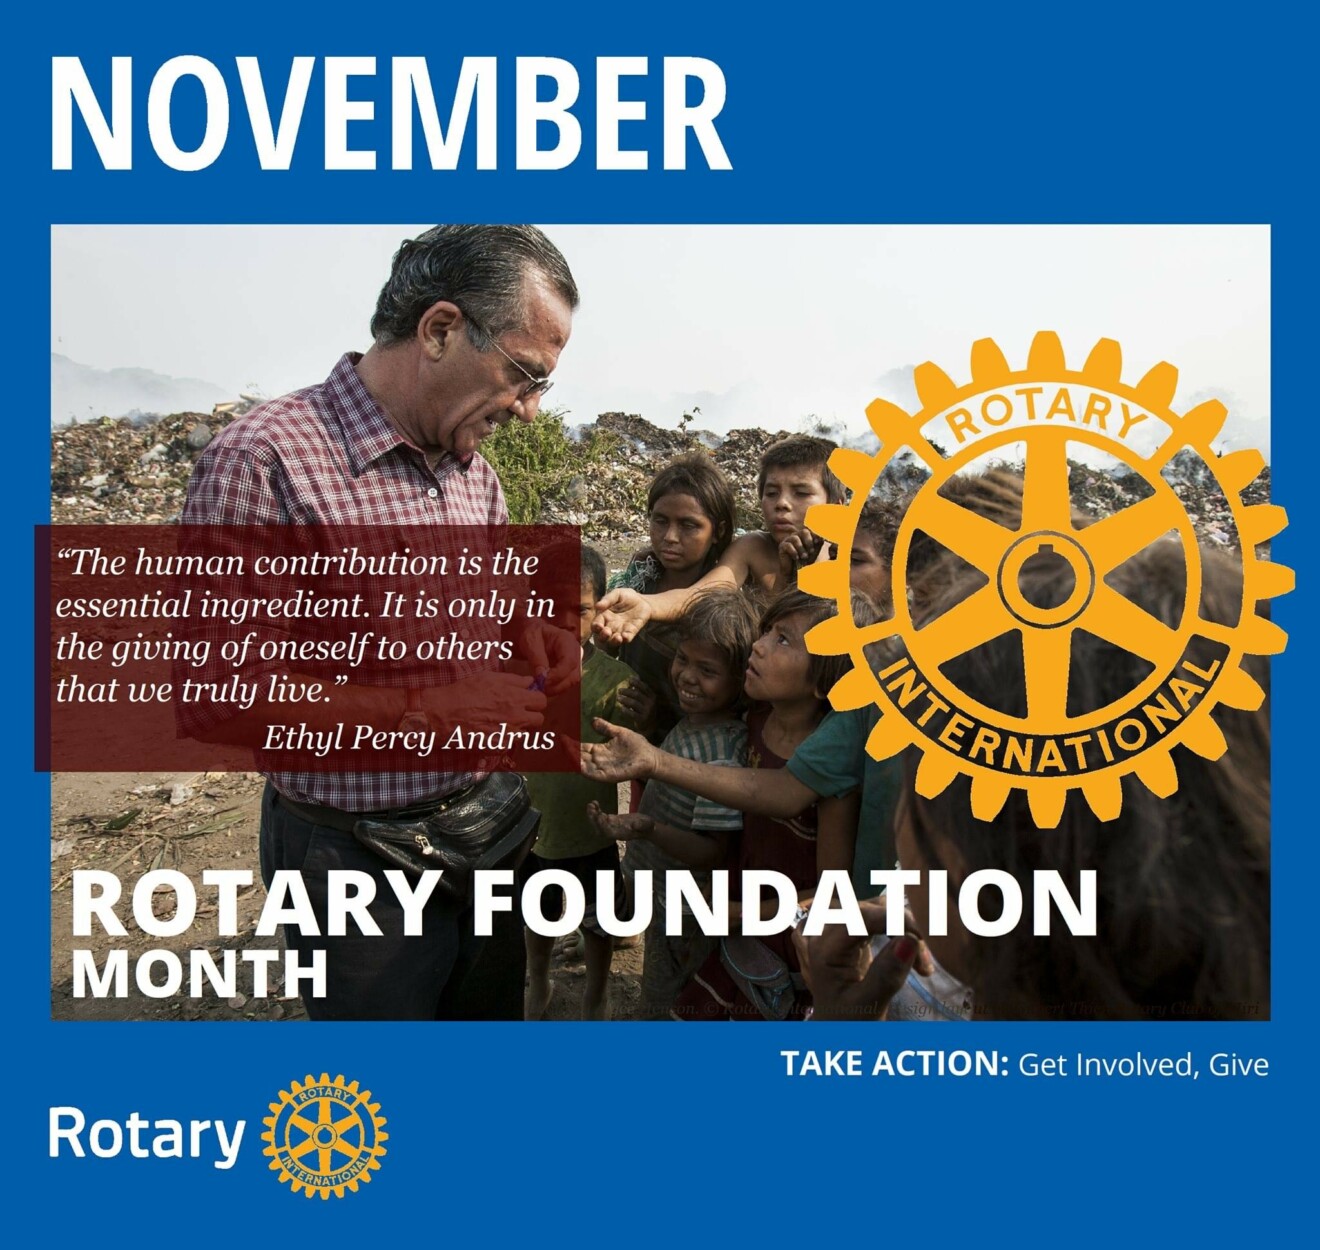 November is Rotary Foundation month